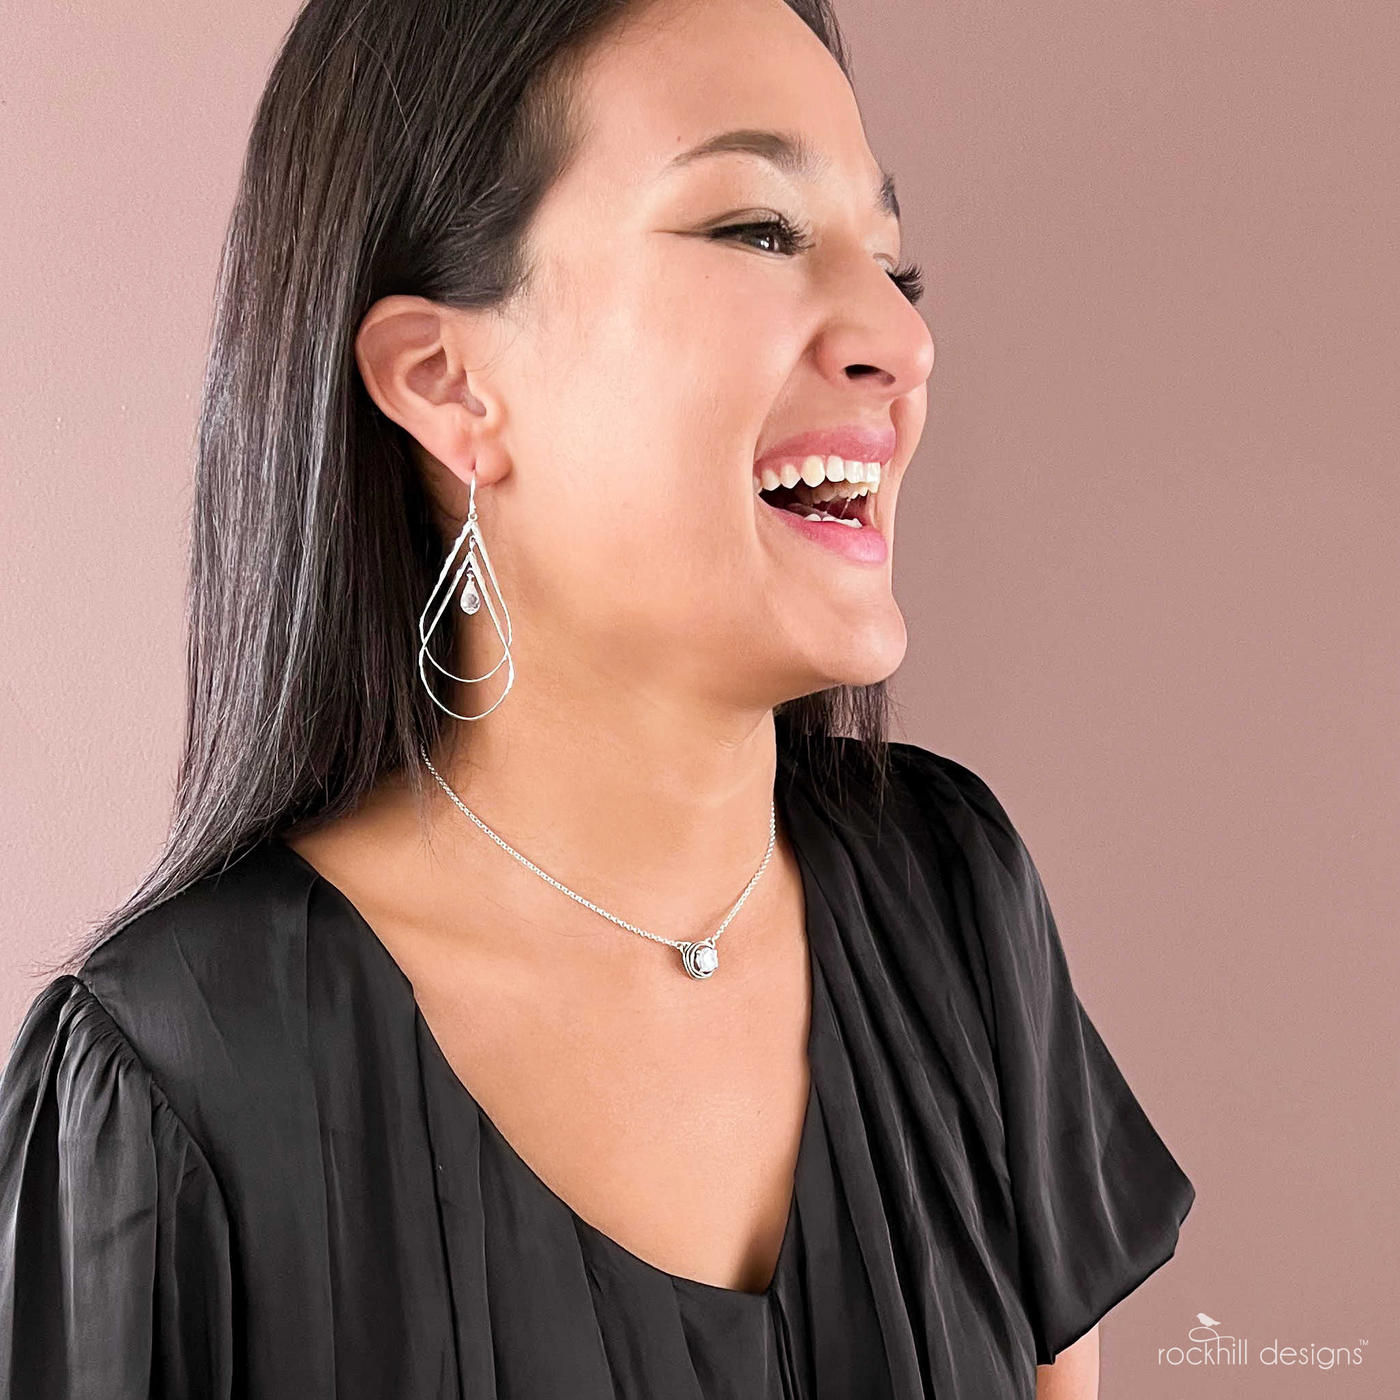 Silver Dangle Earrings- Large with double sterling silver tear-shaped drops. Features a dainty faceted clear cz within. Artisan-crafted, quality sterling silver earrings.Shown on a model.